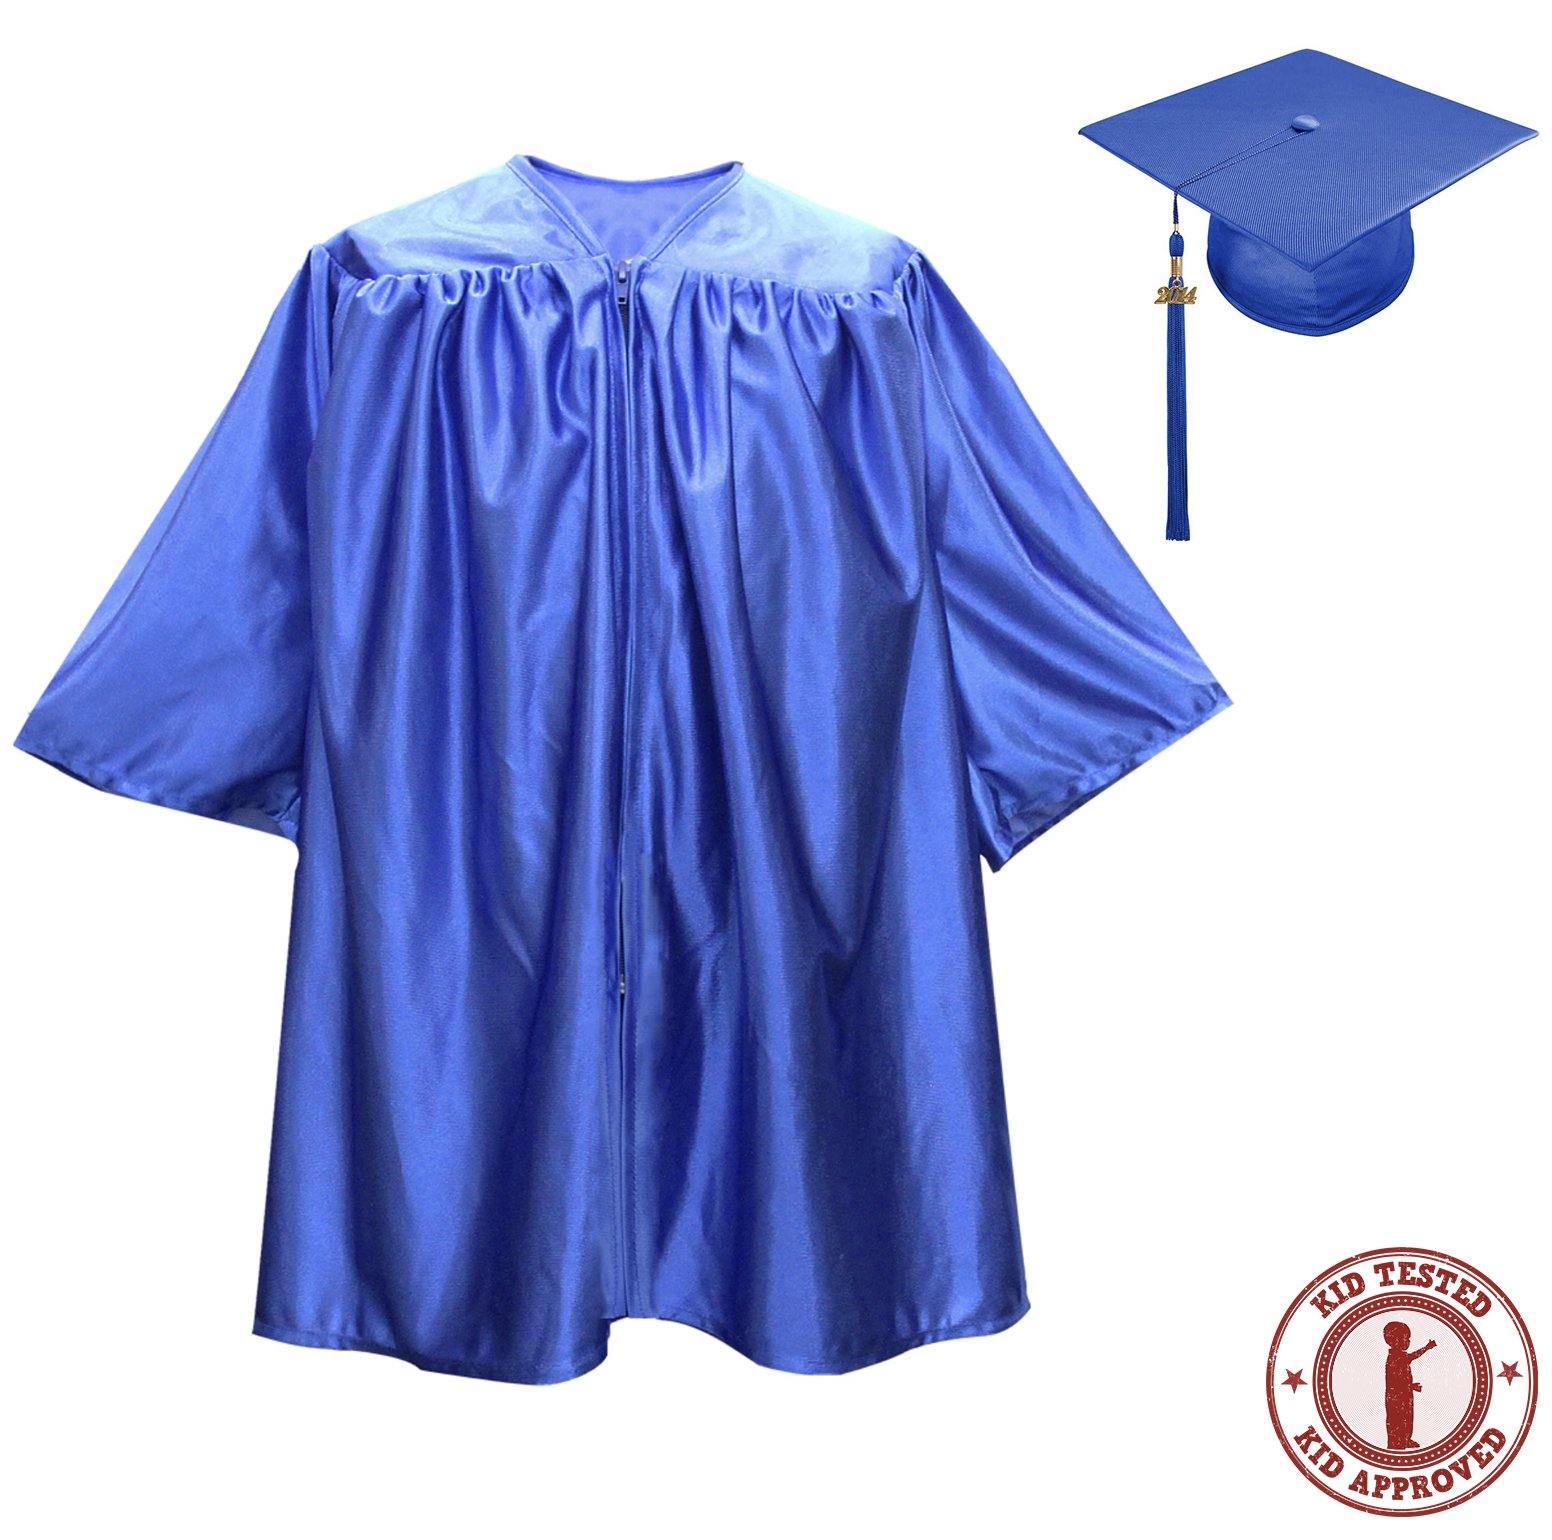 Celebrate your graduation with this stylish cap outline!